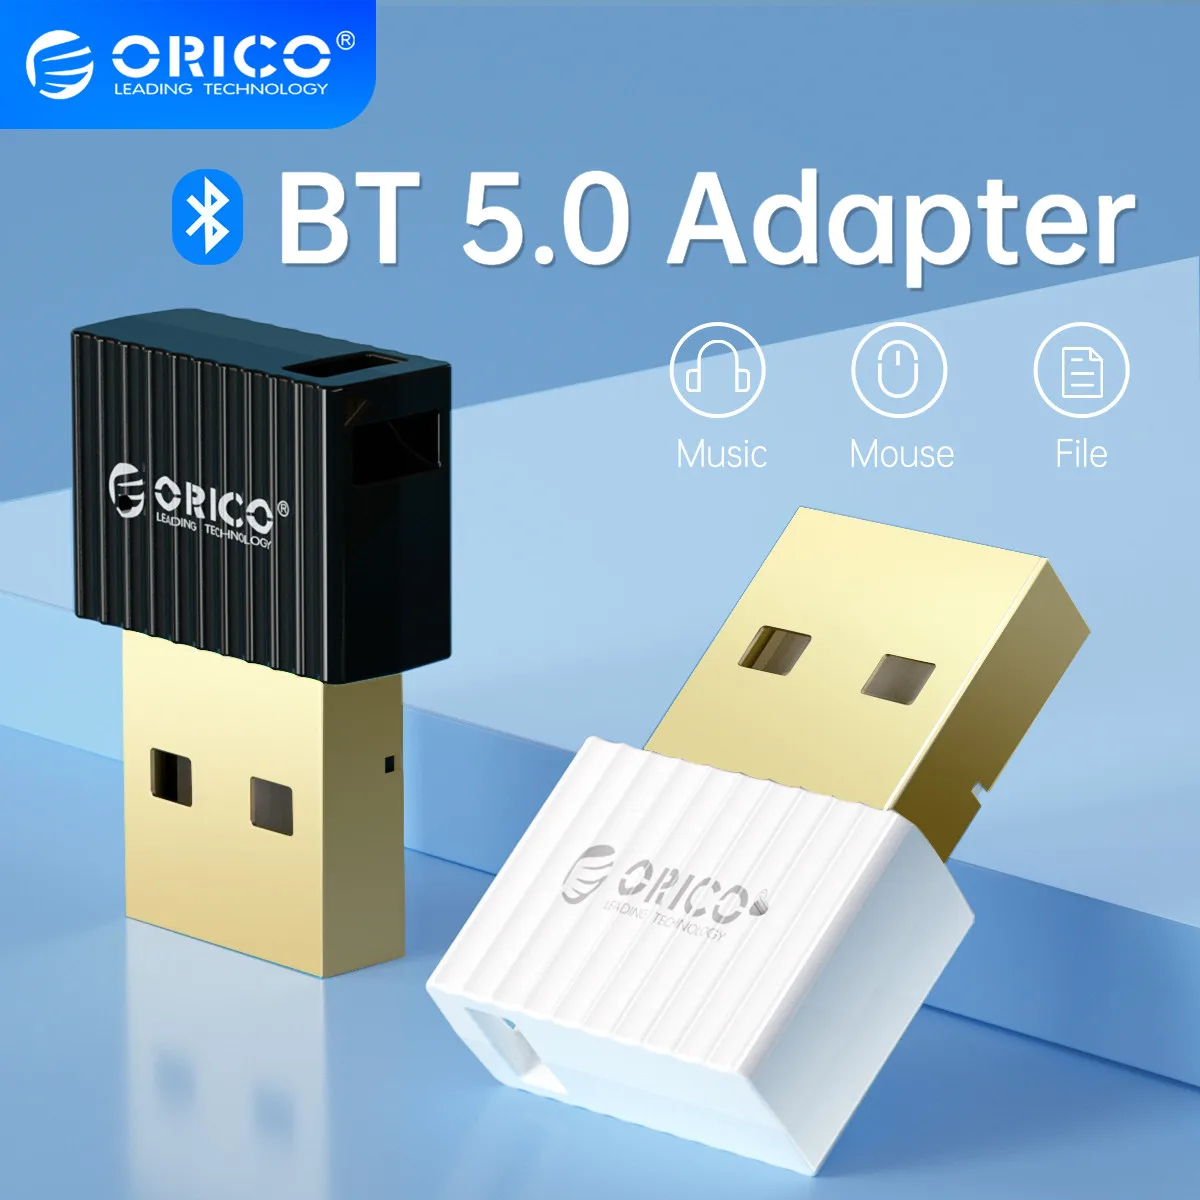 Teoretisk At accelerere aftale Usb Bluetooth Pc Wireless Adapter | Orico Usb Bluetooth Adapter 5.0 - Usb  Bluetooth - Aliexpress